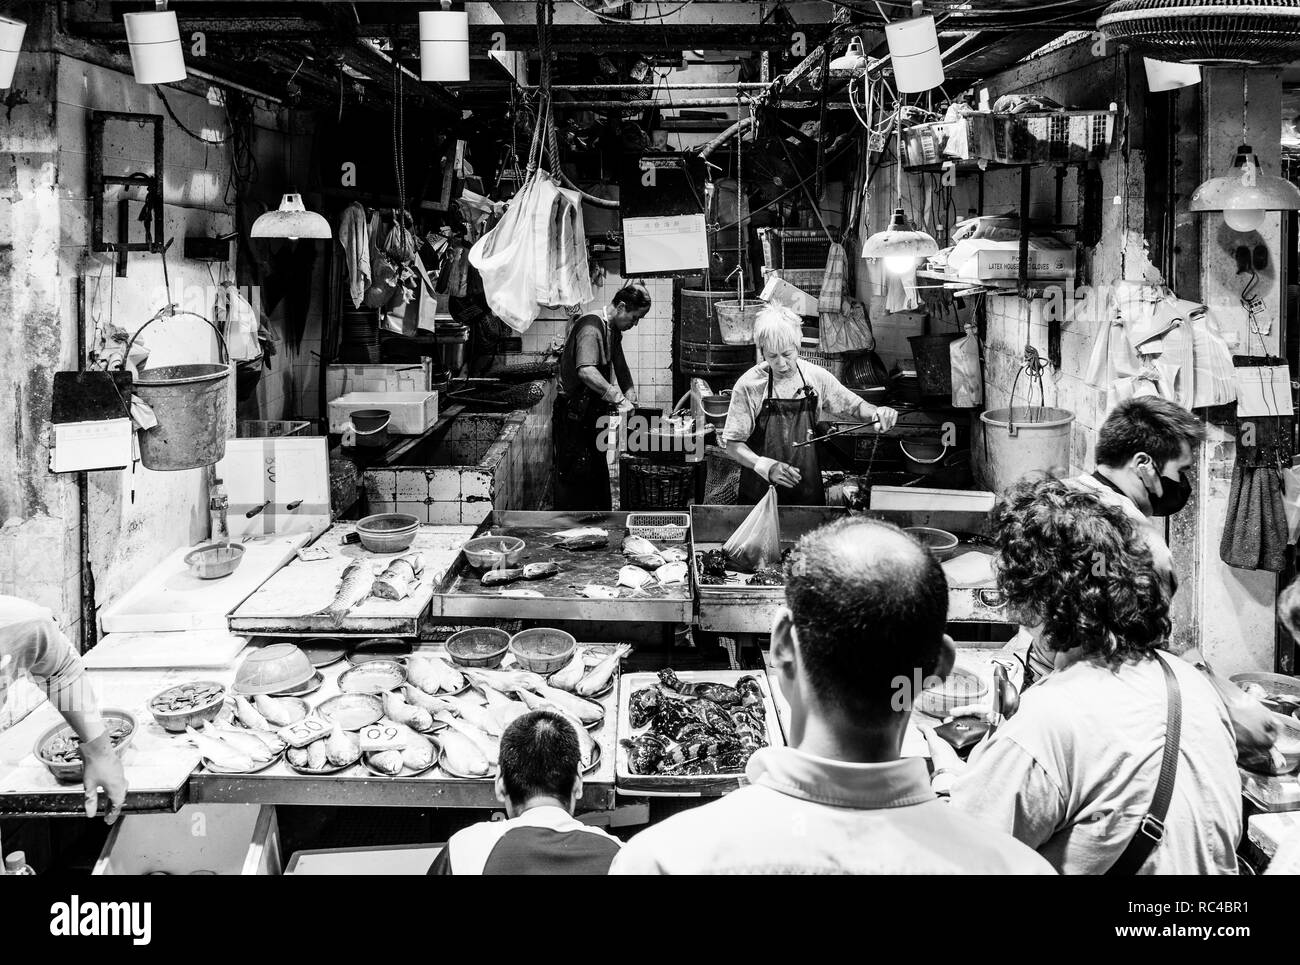 Hong Kong, China - October 13 2018: People buying seafood at the the Chun Yeung Street market in North Point in Hong Kong island. This is a traditiona Stock Photo